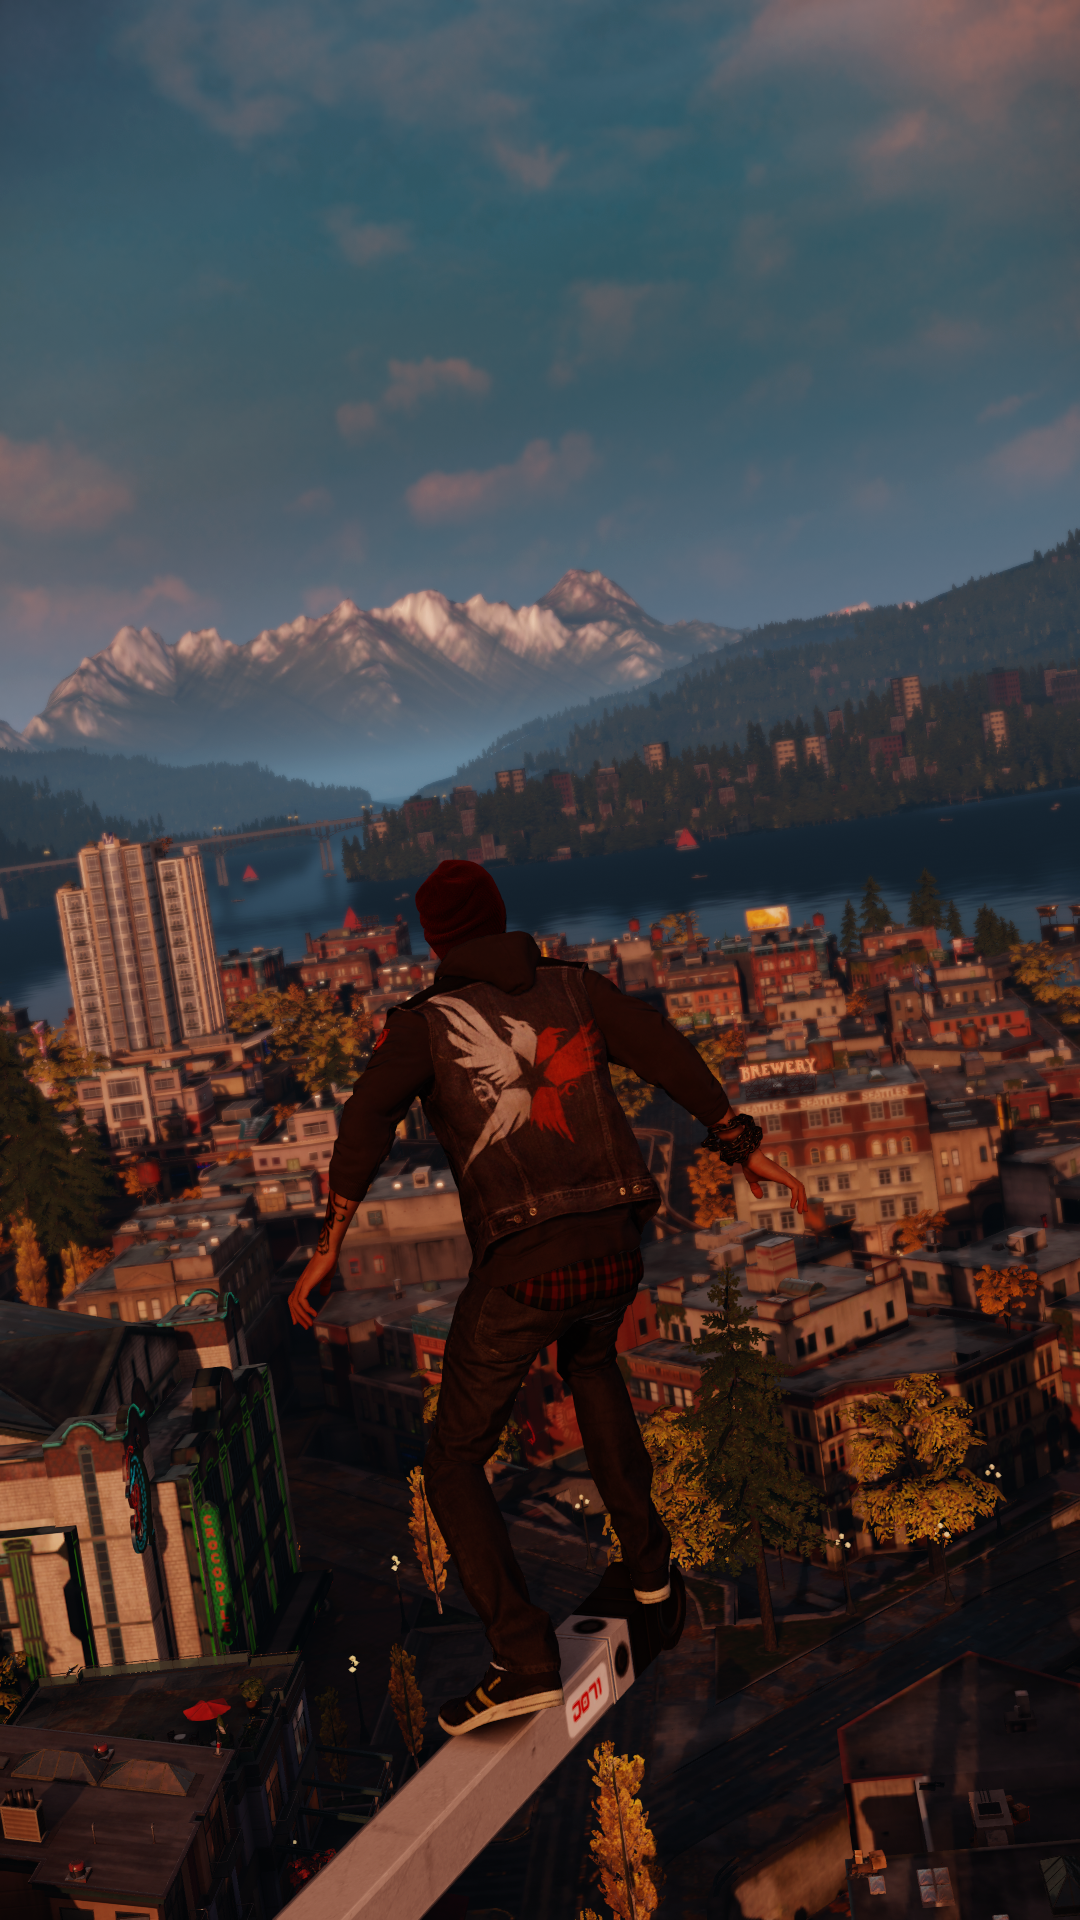 Infamous Second Son Iphone Wallpapers